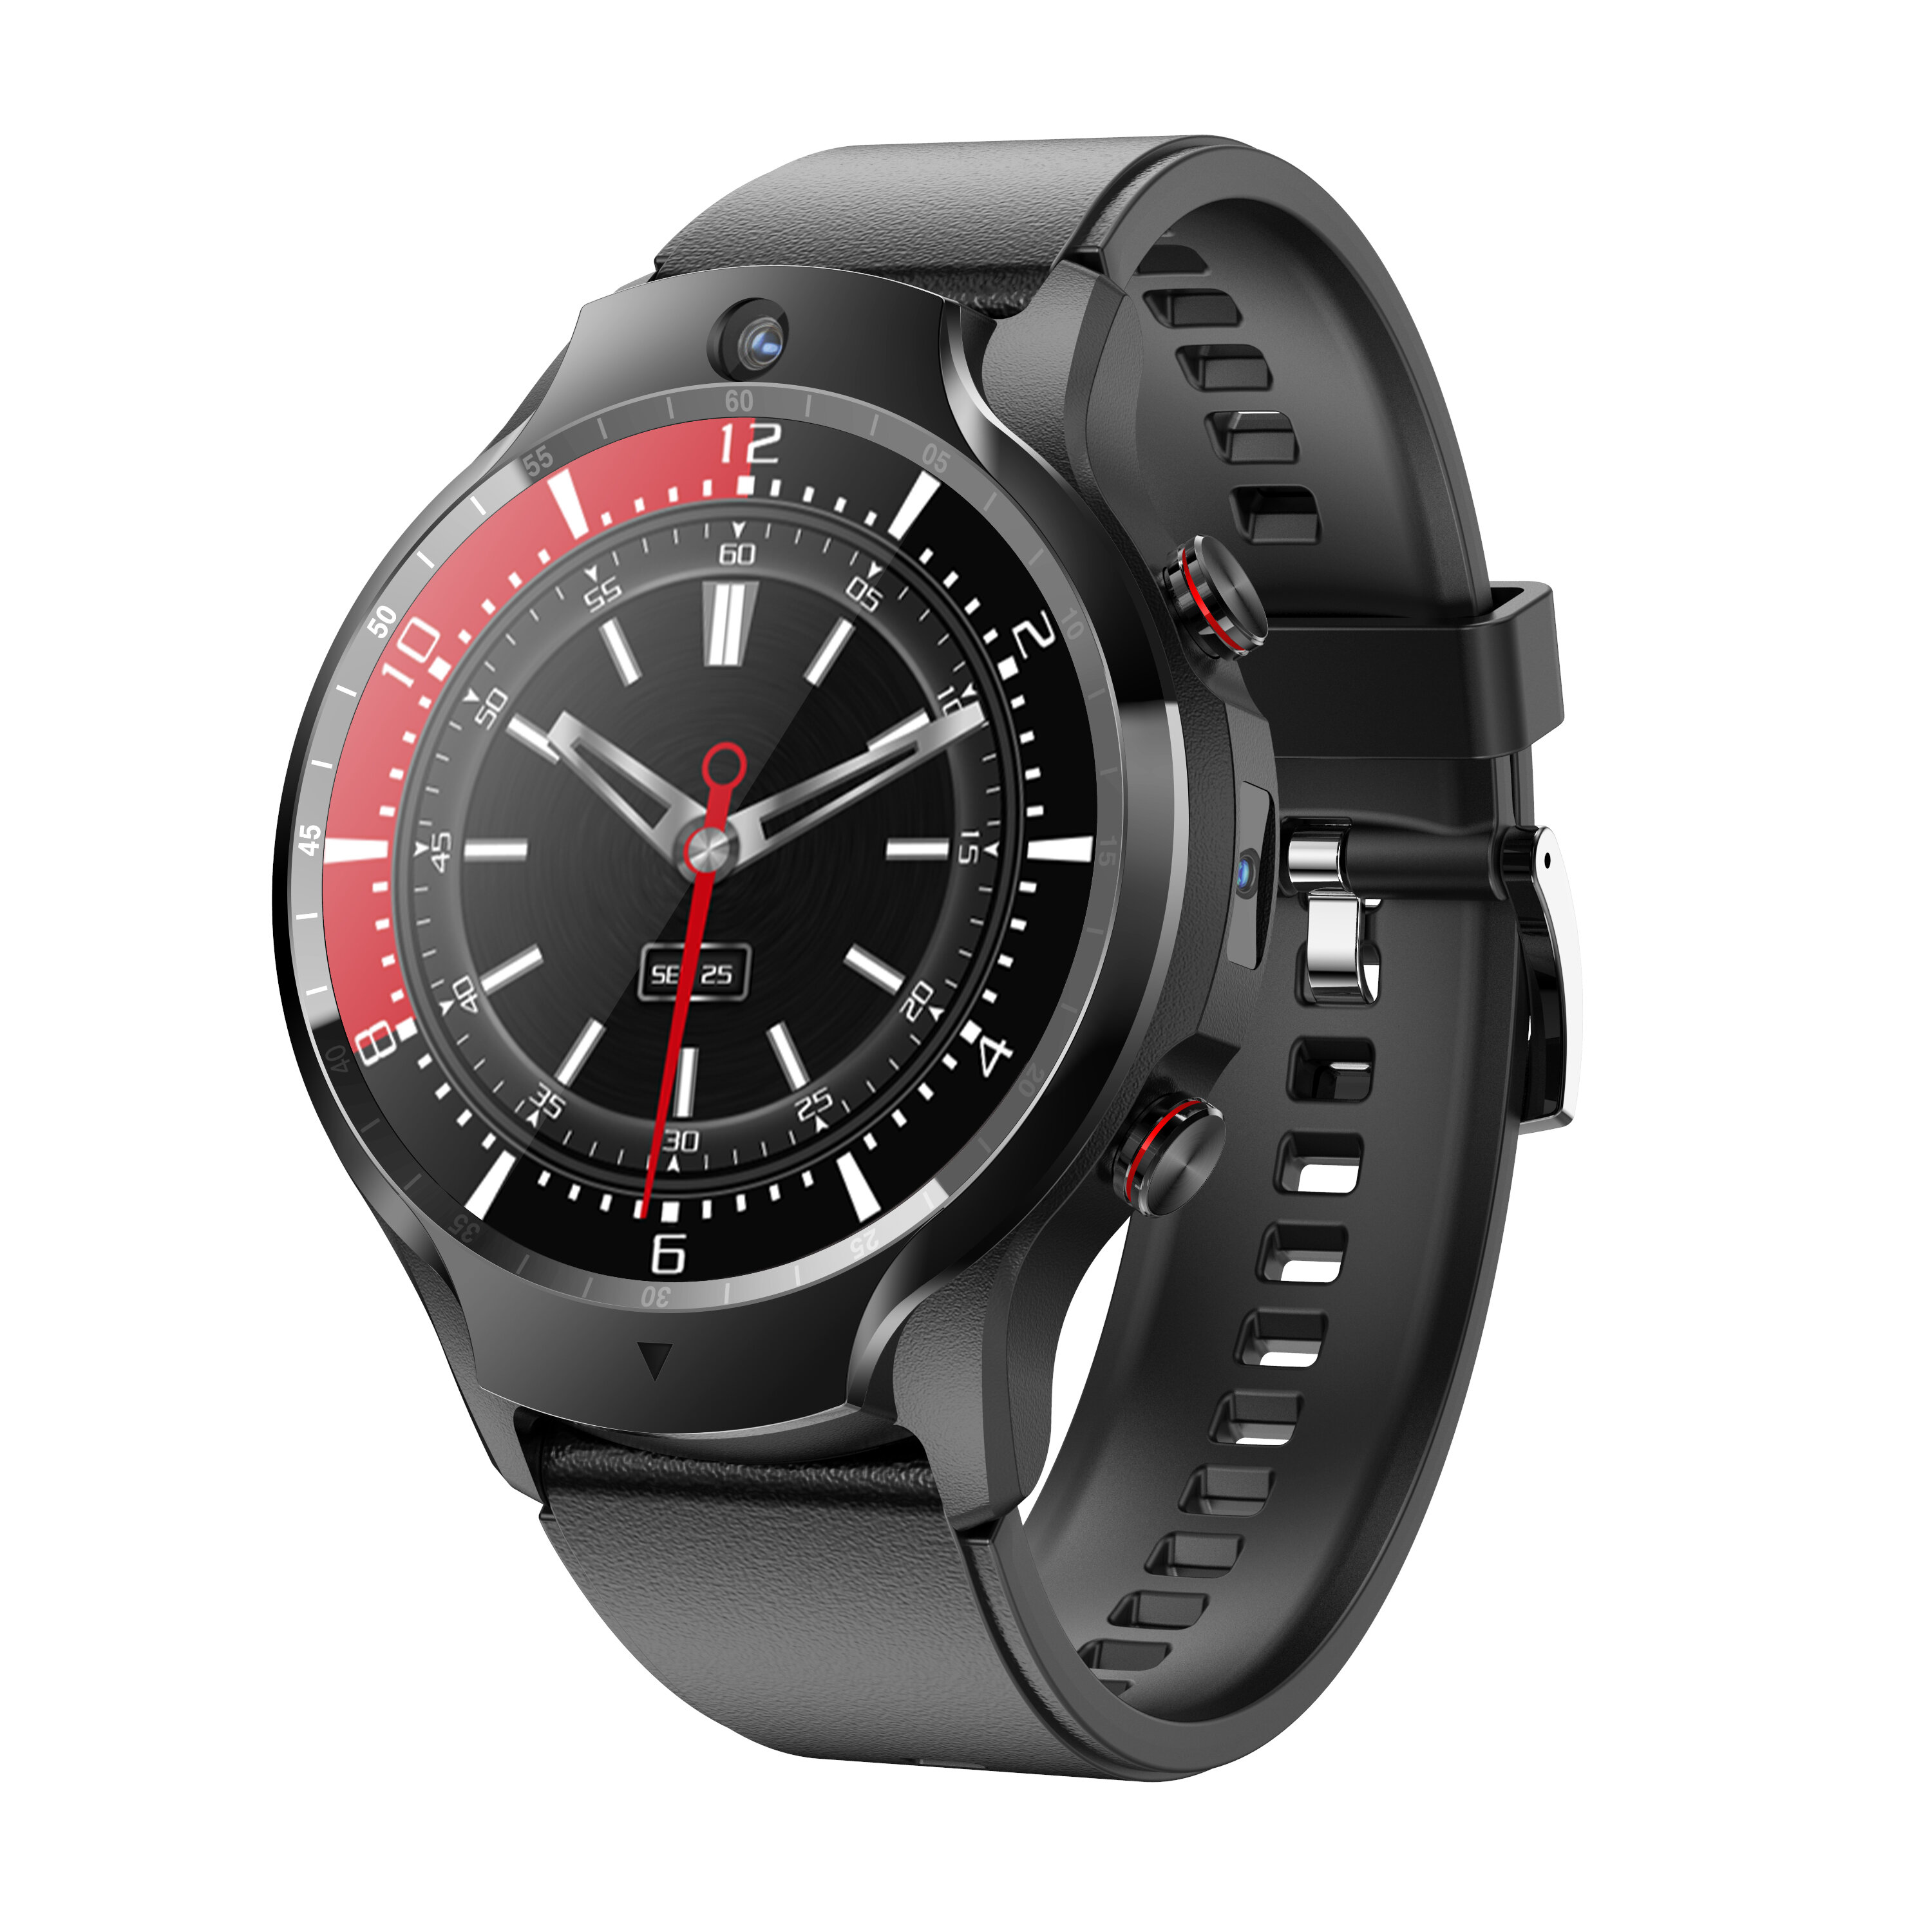 Senbono Air 1 1.6 inch 400*400px 3G+32G/ 4G+128G 4G-LTE Watch Phone GPS Android 9.0 Heart Rate SpO2 